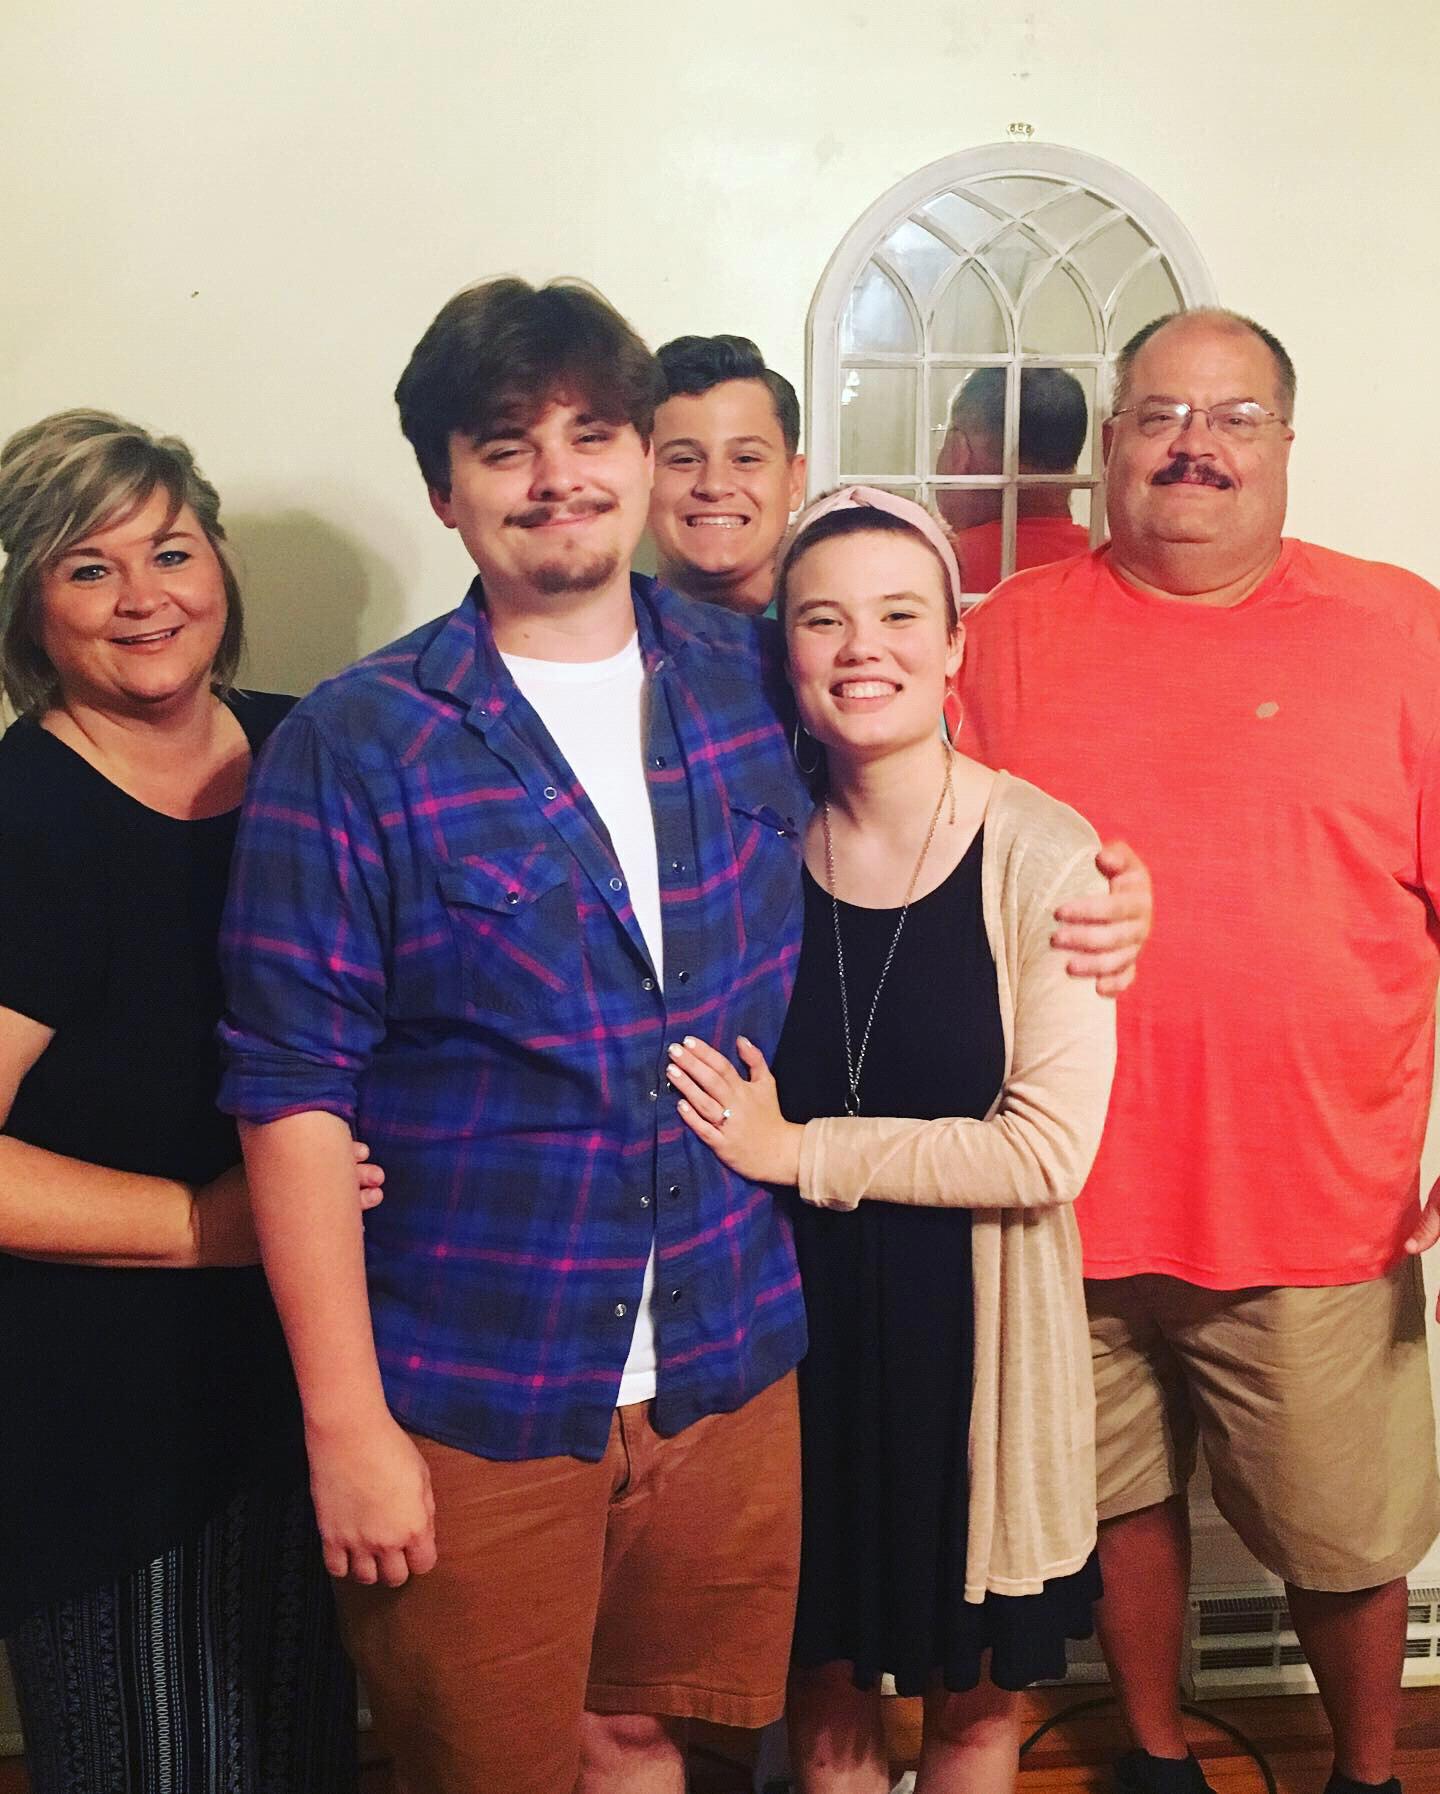 Shrum Family. (Left to right: Sherry/Mom, Kendall, Riley/Brother, Angela, Mike/Dad)